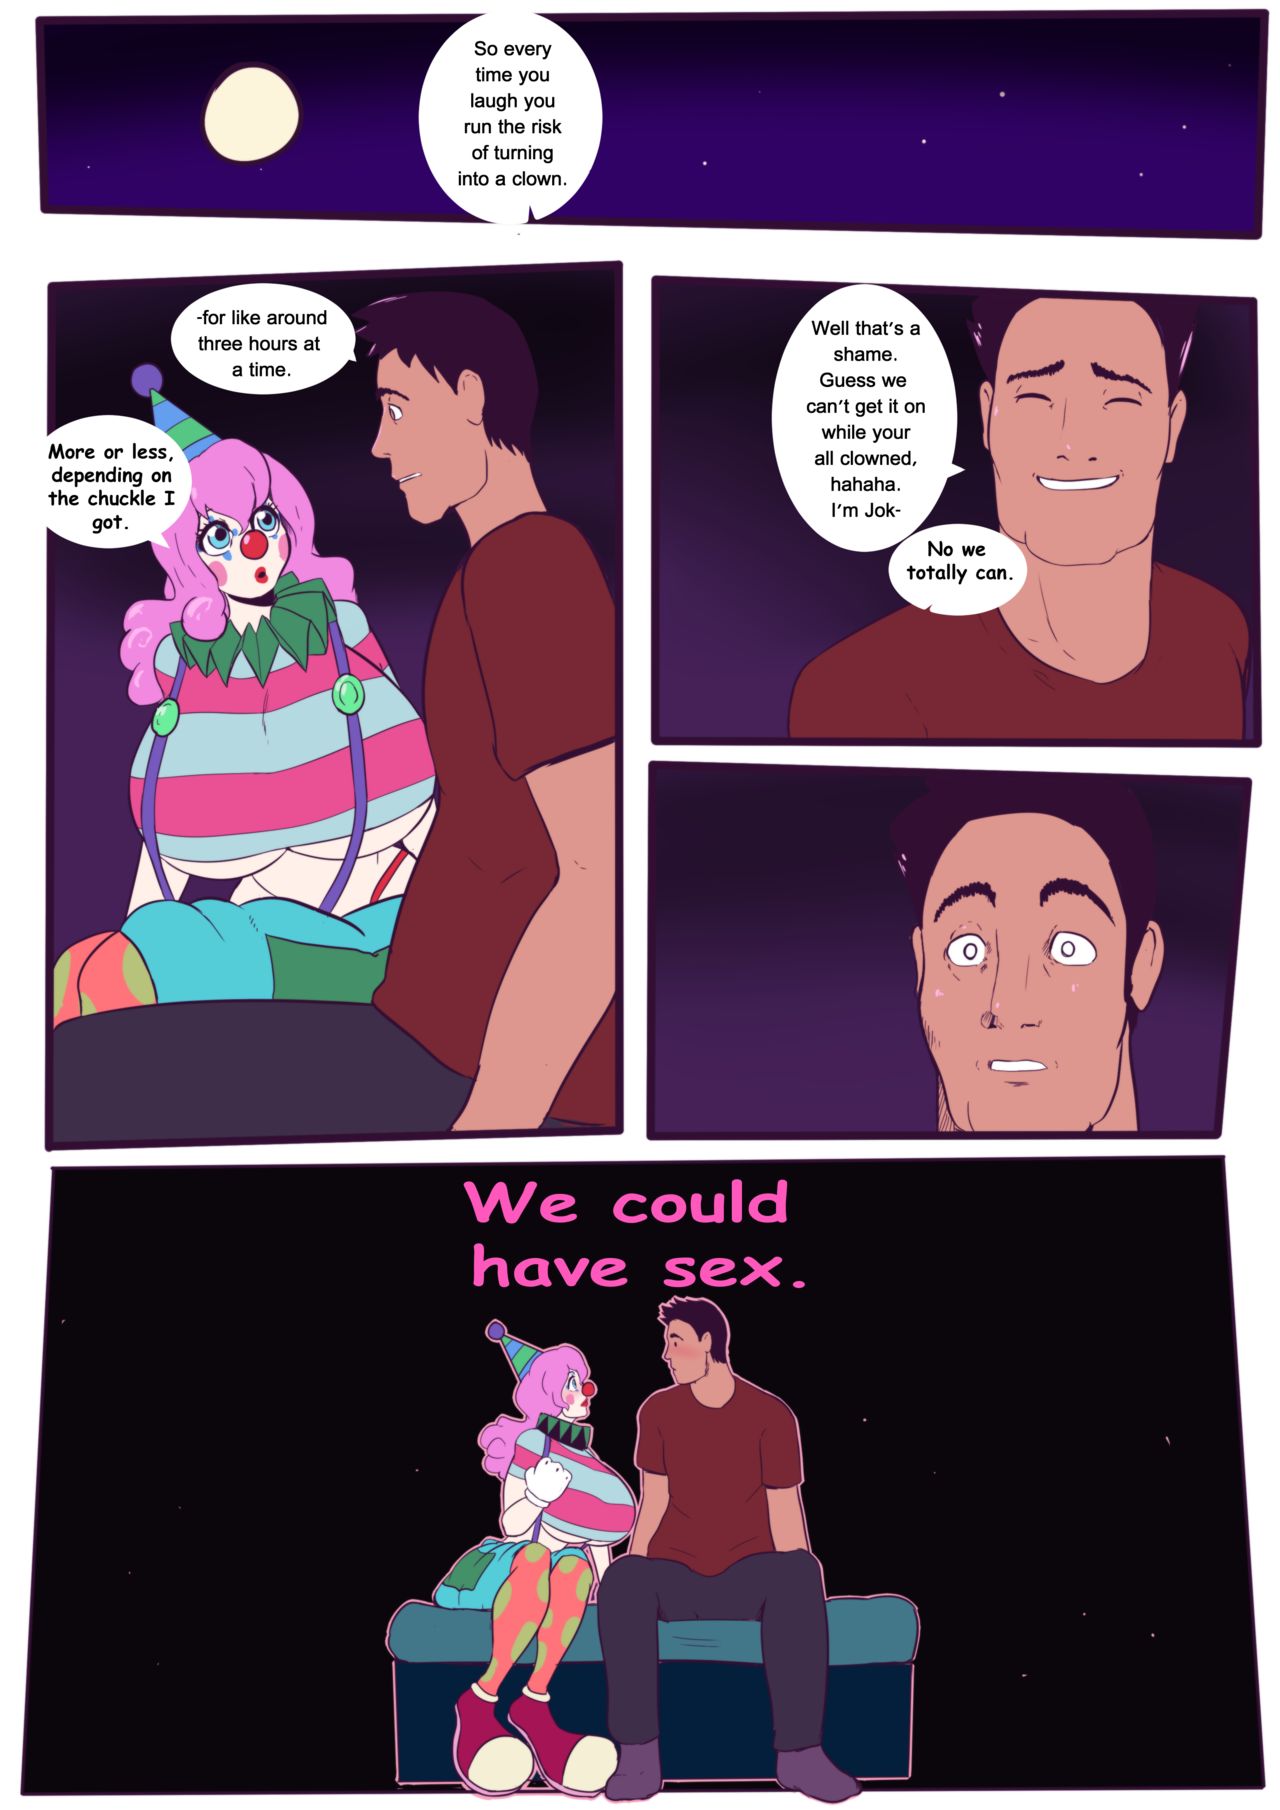 A Perfectly Normal Comic Where Nothing Weird Happens Lemonfont 14